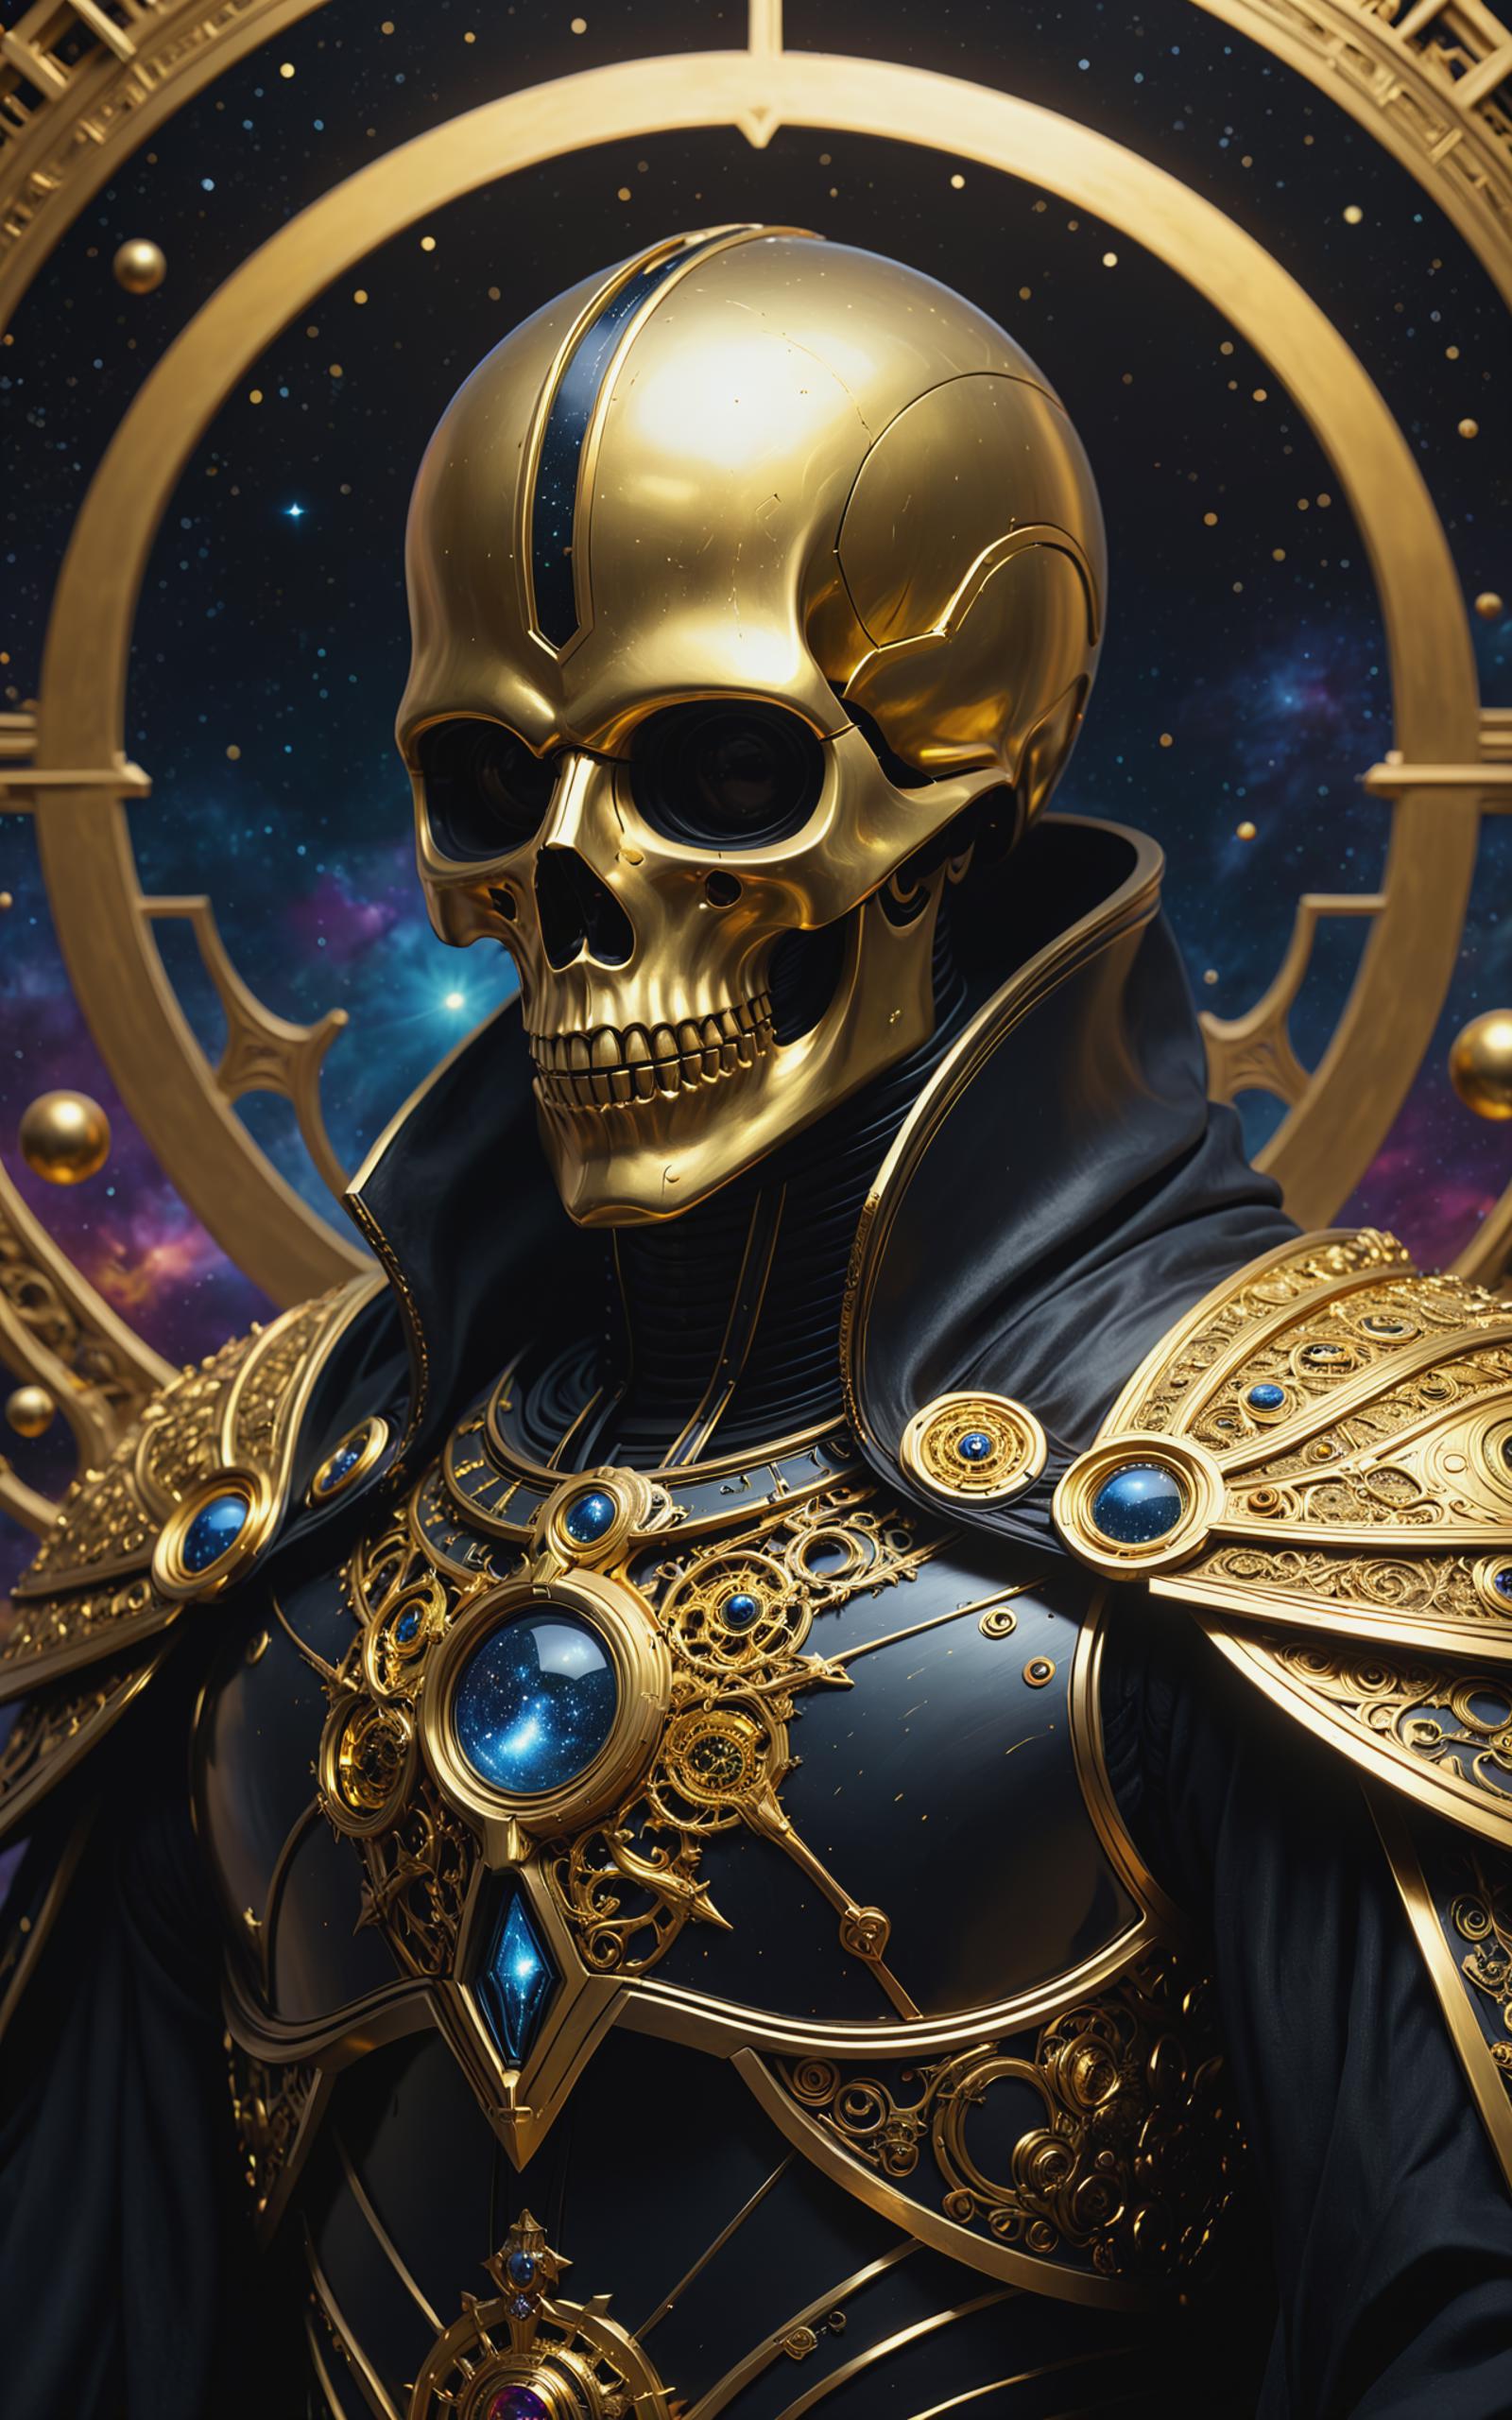 A golden skeleton wearing a black robe and a blue gemstone.